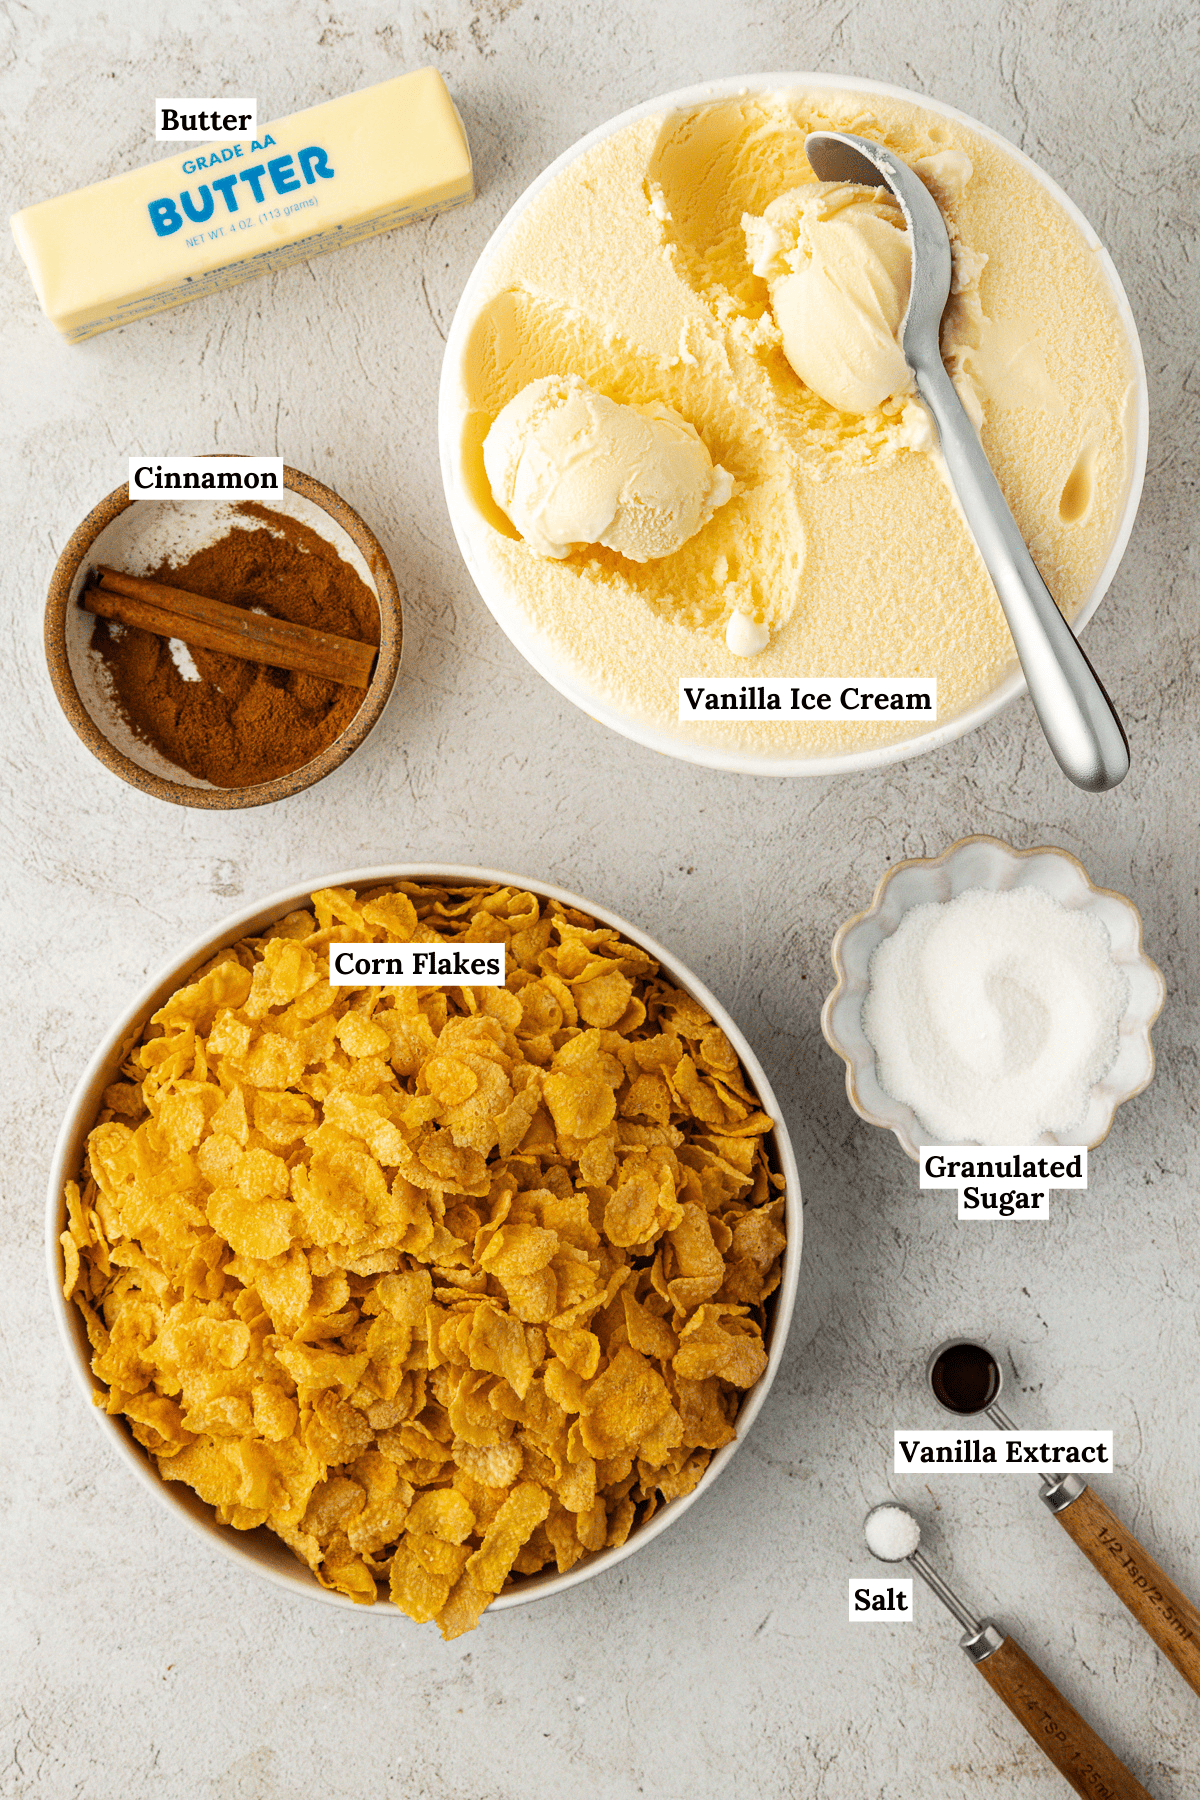 over head view of the ingredients for fried ice cream including vanilla ice cream, butter, cinnamon, corn flakes, granulated sugar, vanilla extract, and salt